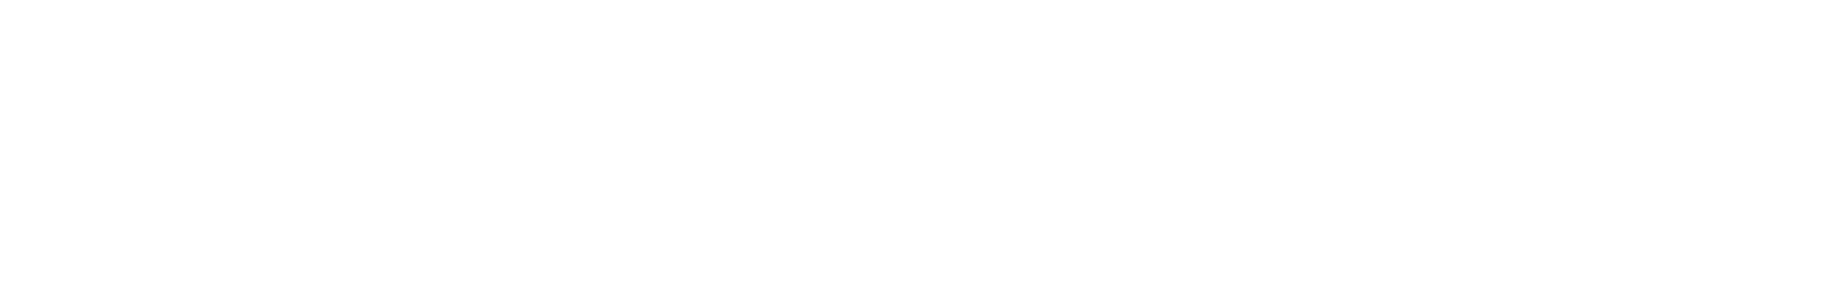 Rotary-and-Wheel.png